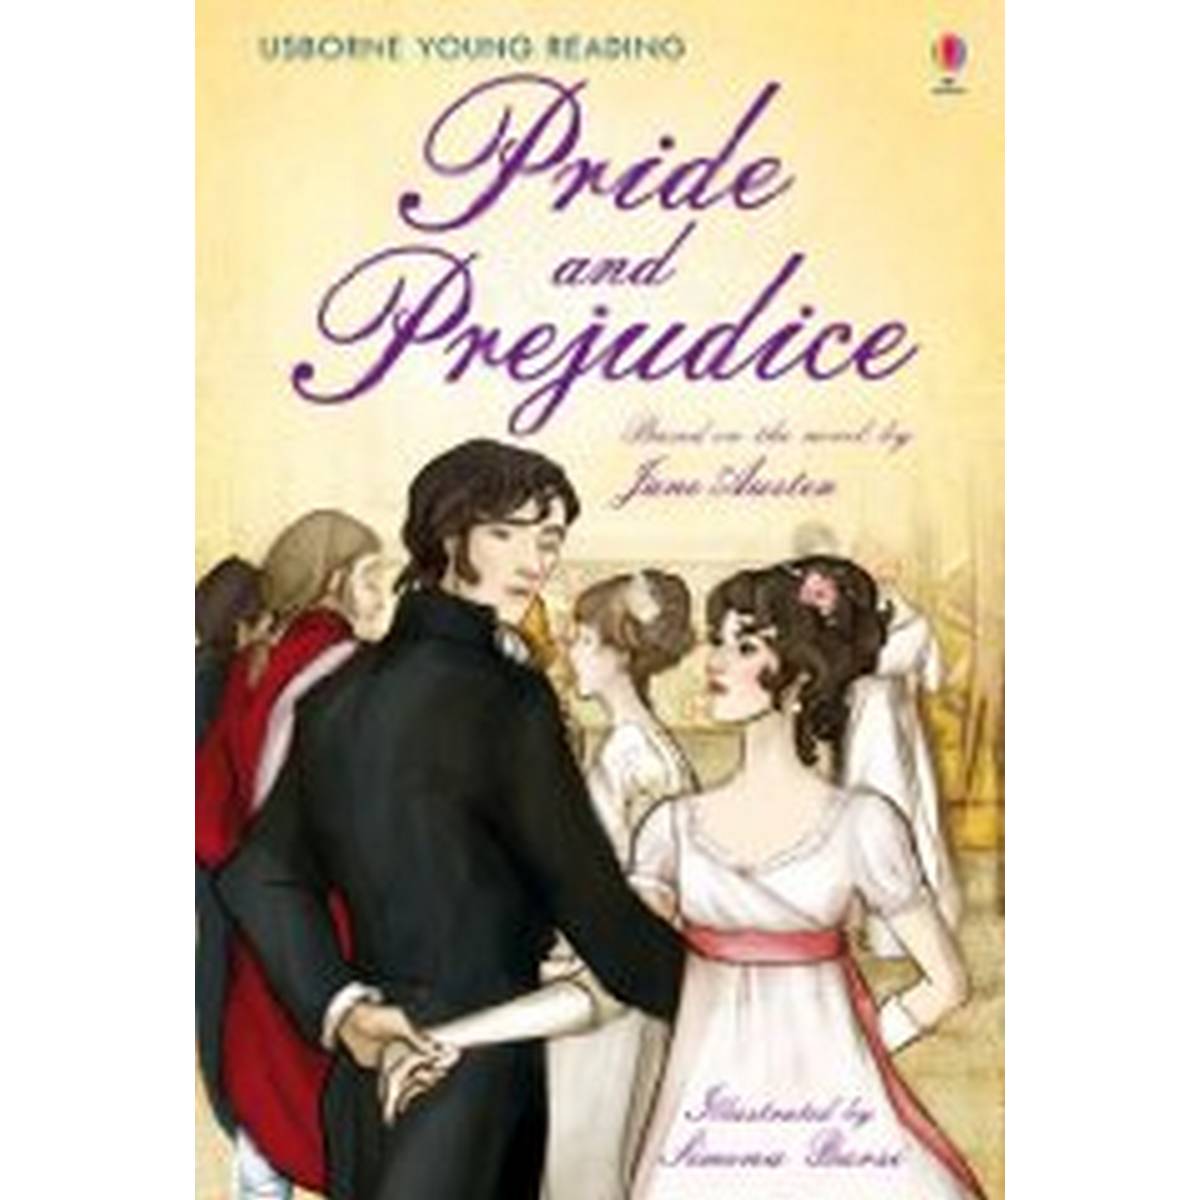 Pride and Prejudice (Young Reading Series 3)